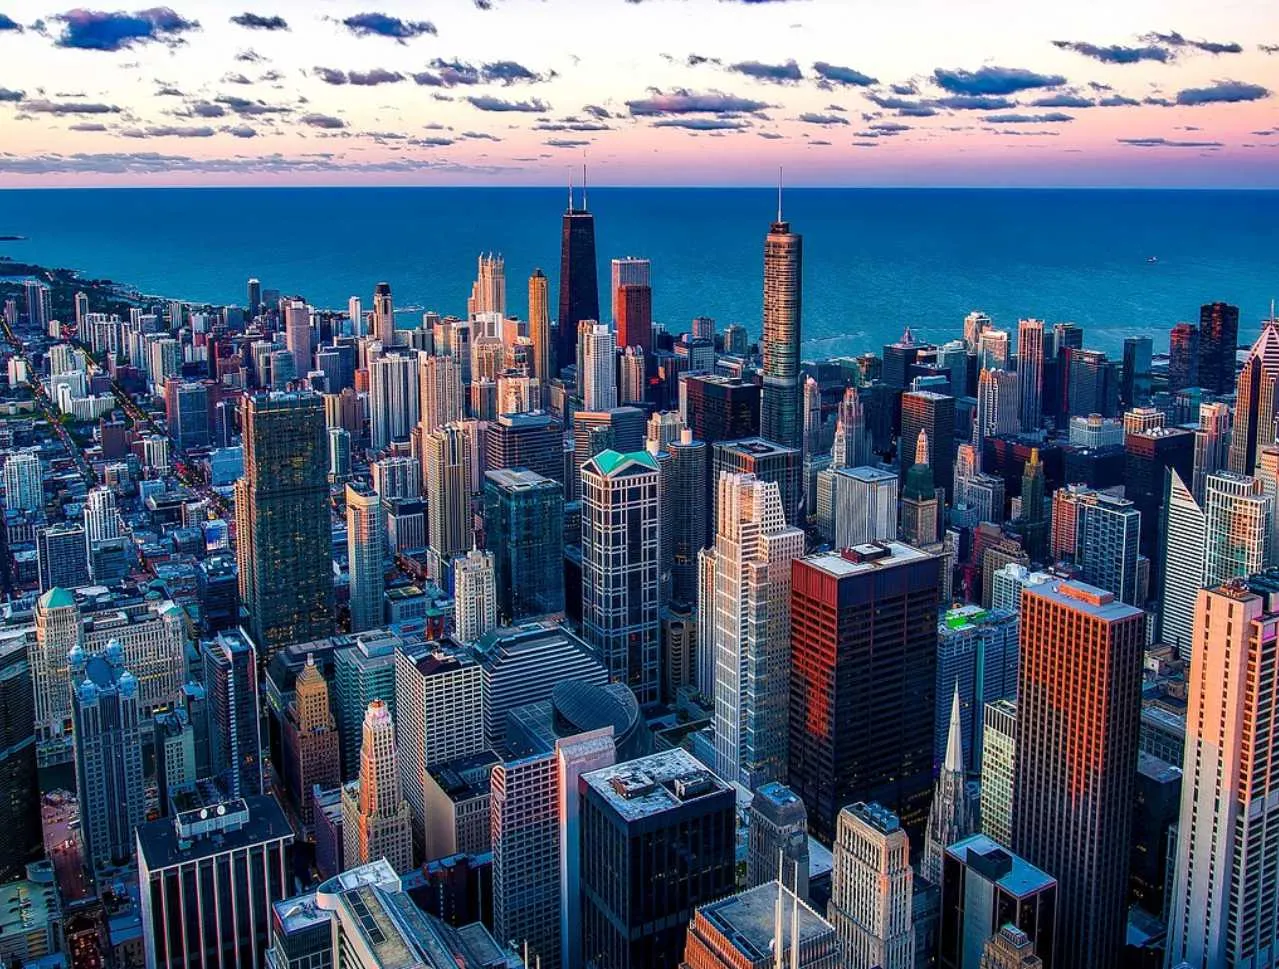 evening image of chicago